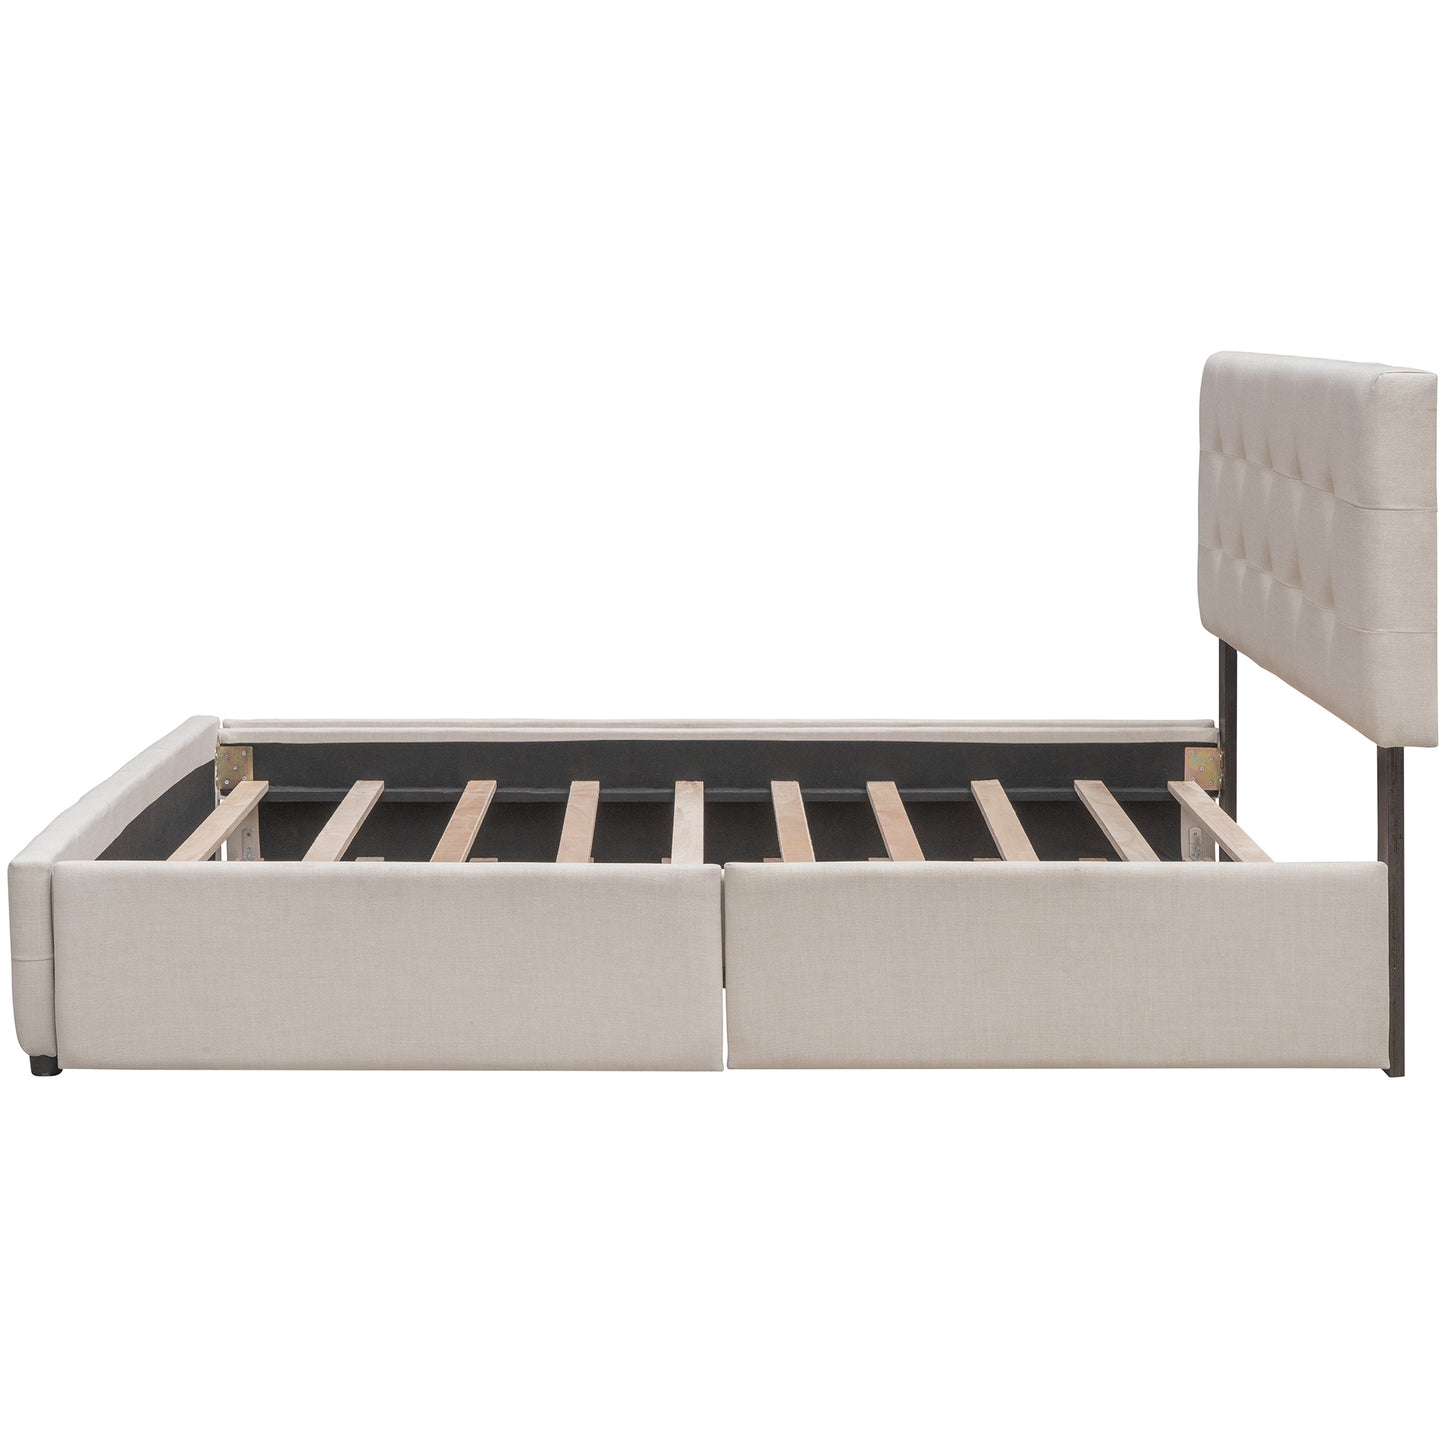 Upholstered Platform Bed with 2 Drawers and 1 Twin XL Trundle,  Linen Fabric, Queen Size - Dark Beige